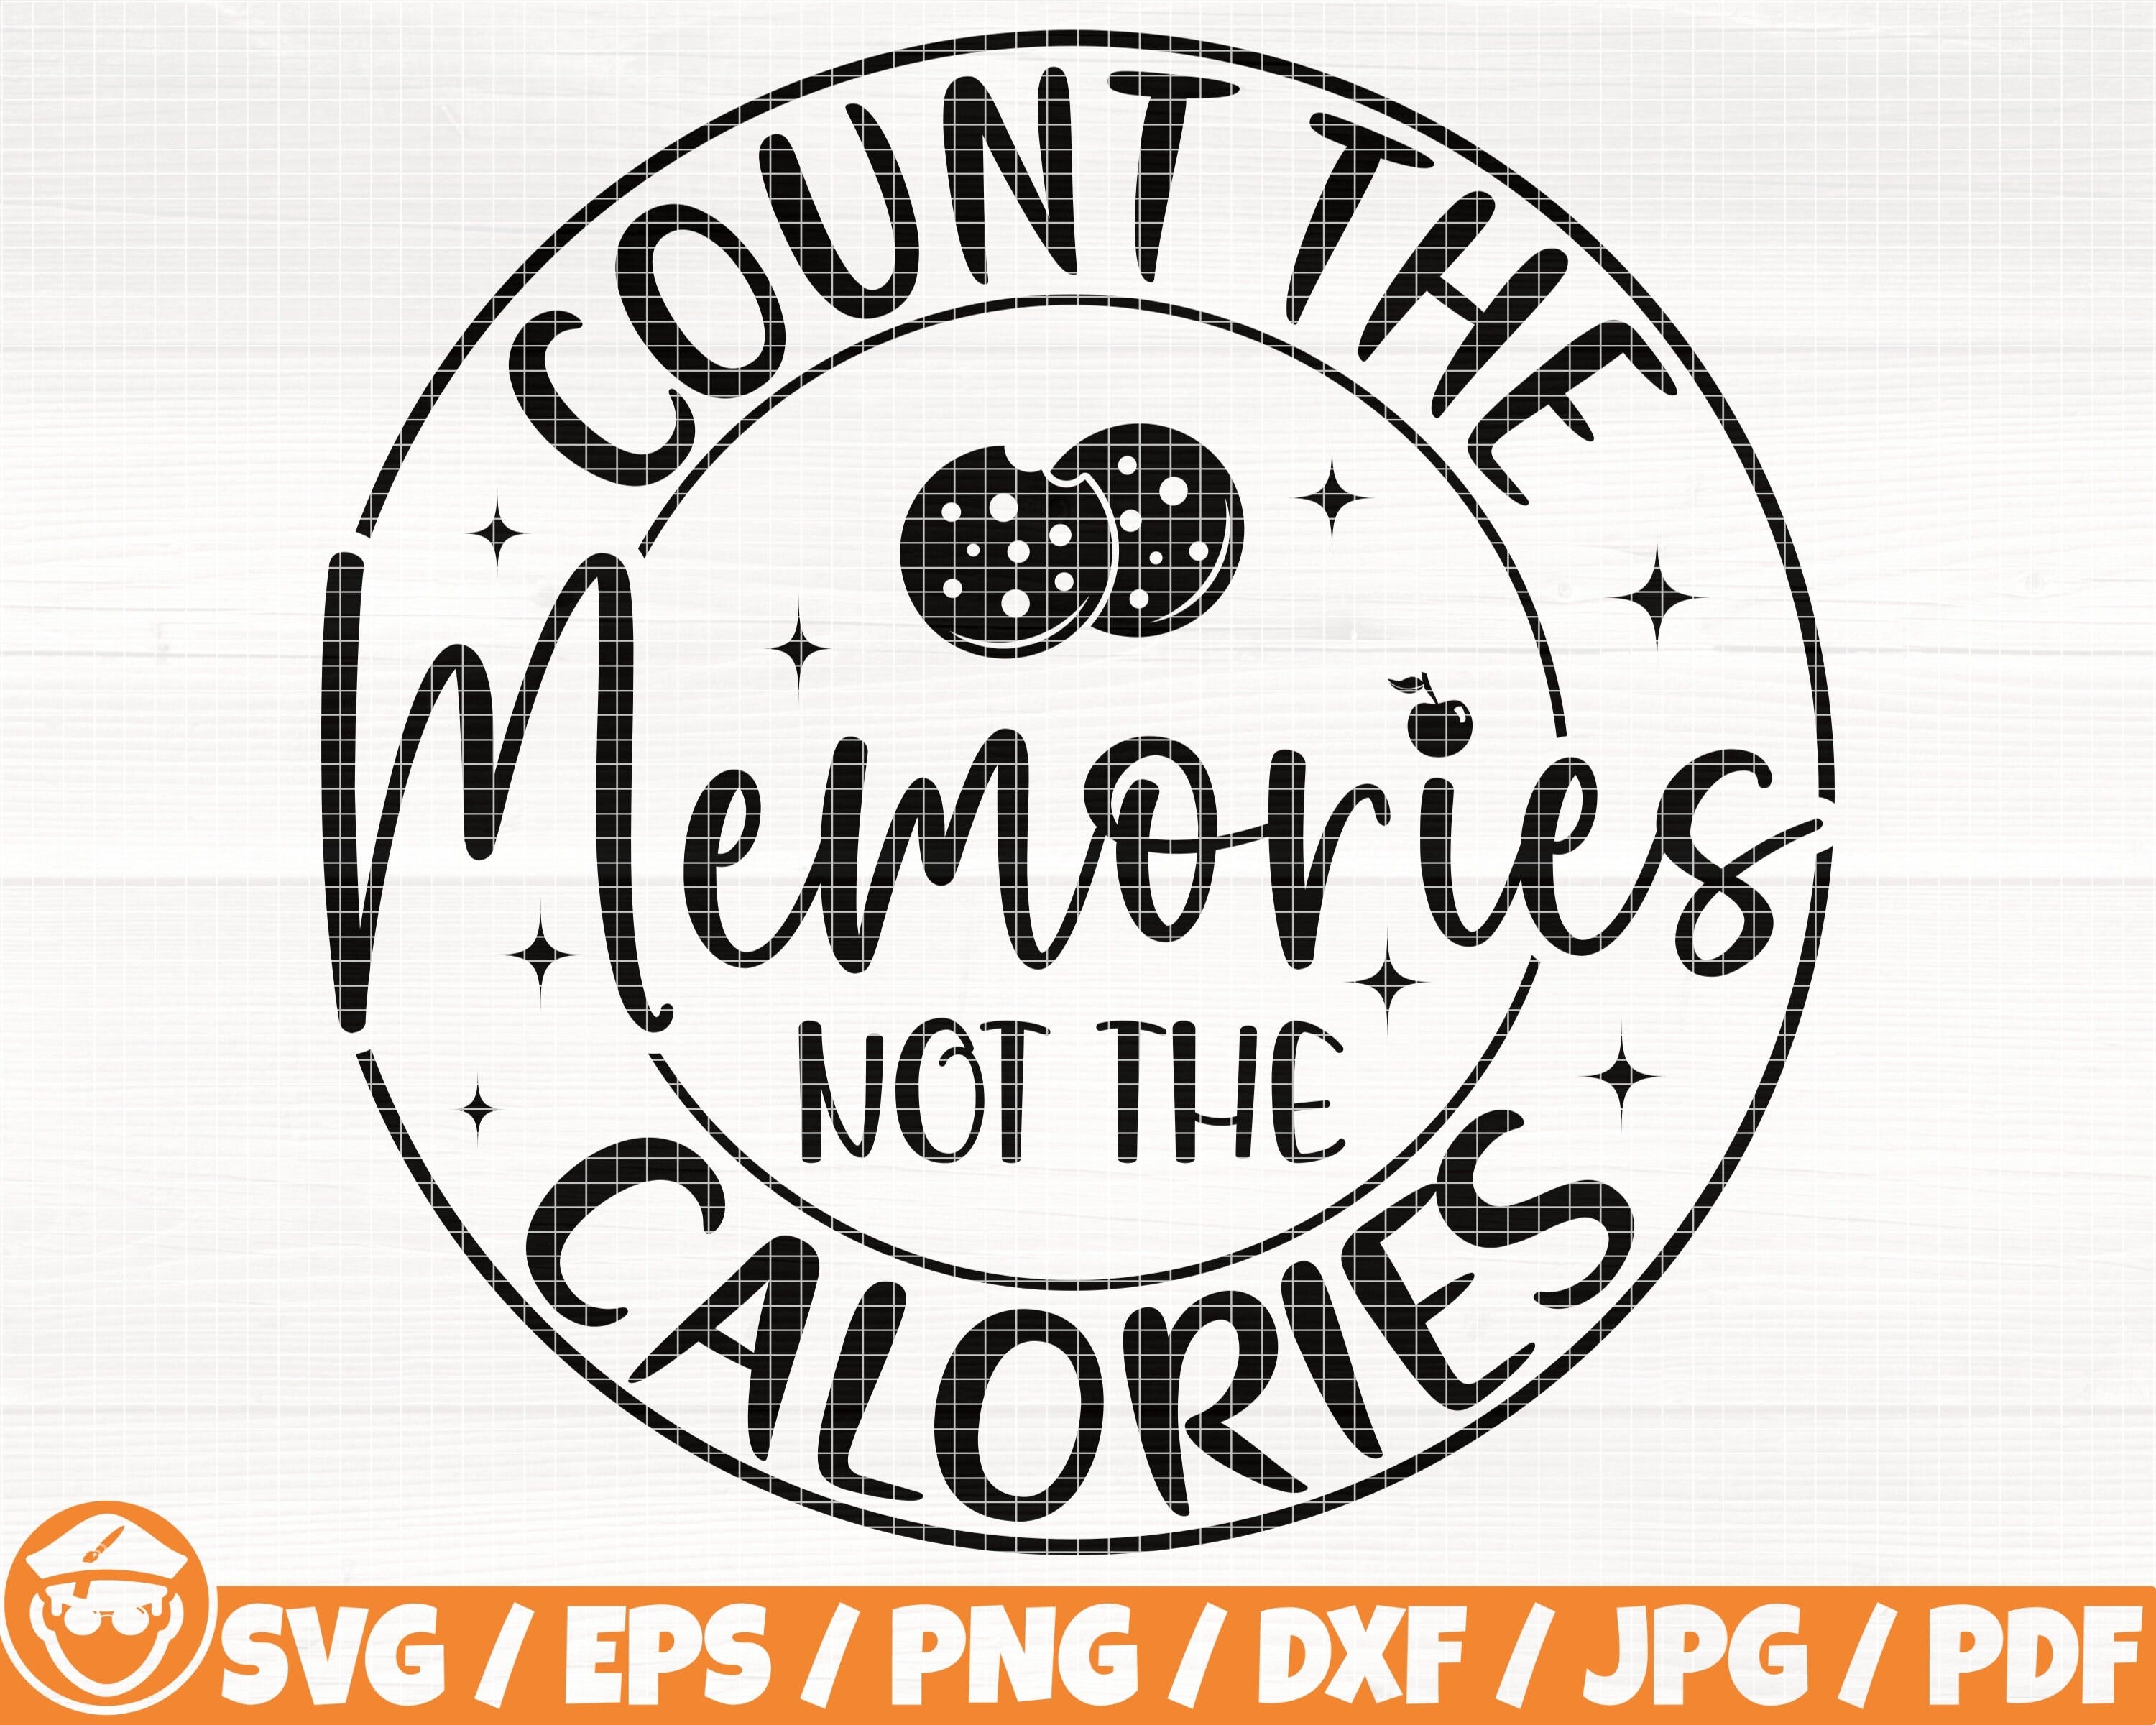 Count The Memories Not The Calories Svg/Eps/Png/Dxf/Jpg/Pdf, Kitchen Logo, Cherry Silhouette, Biscuits Svg, Food Inkscape, Memories Vector